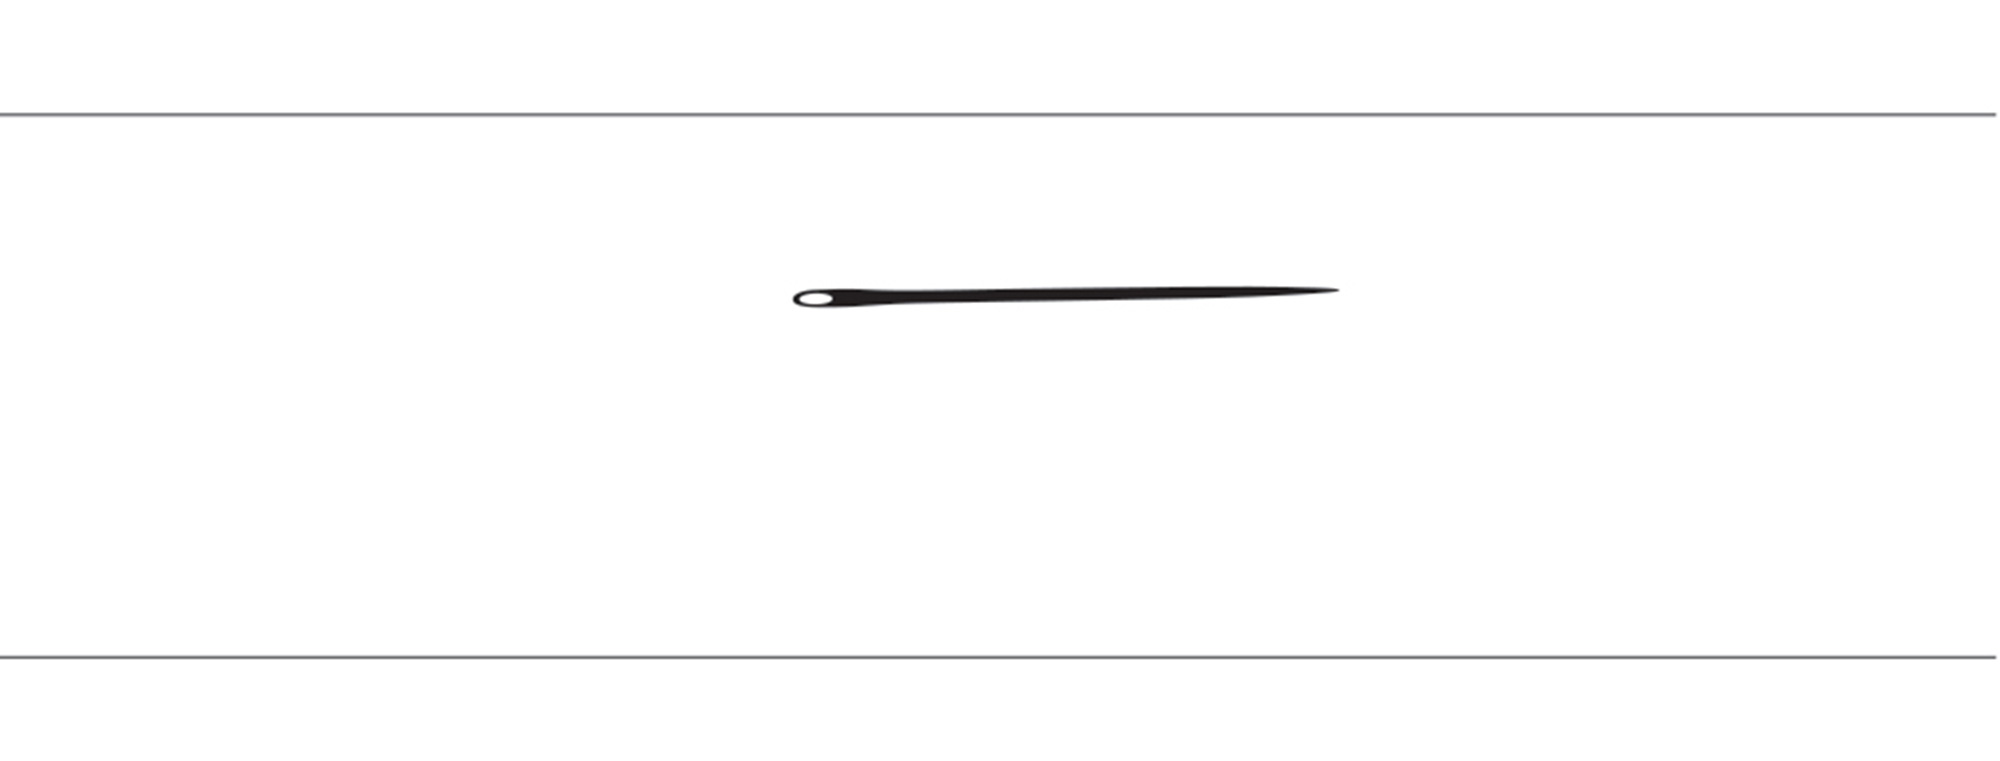 A digital illustration of a needle that is entirely parallel to the ruled lines, thus touching no lines.